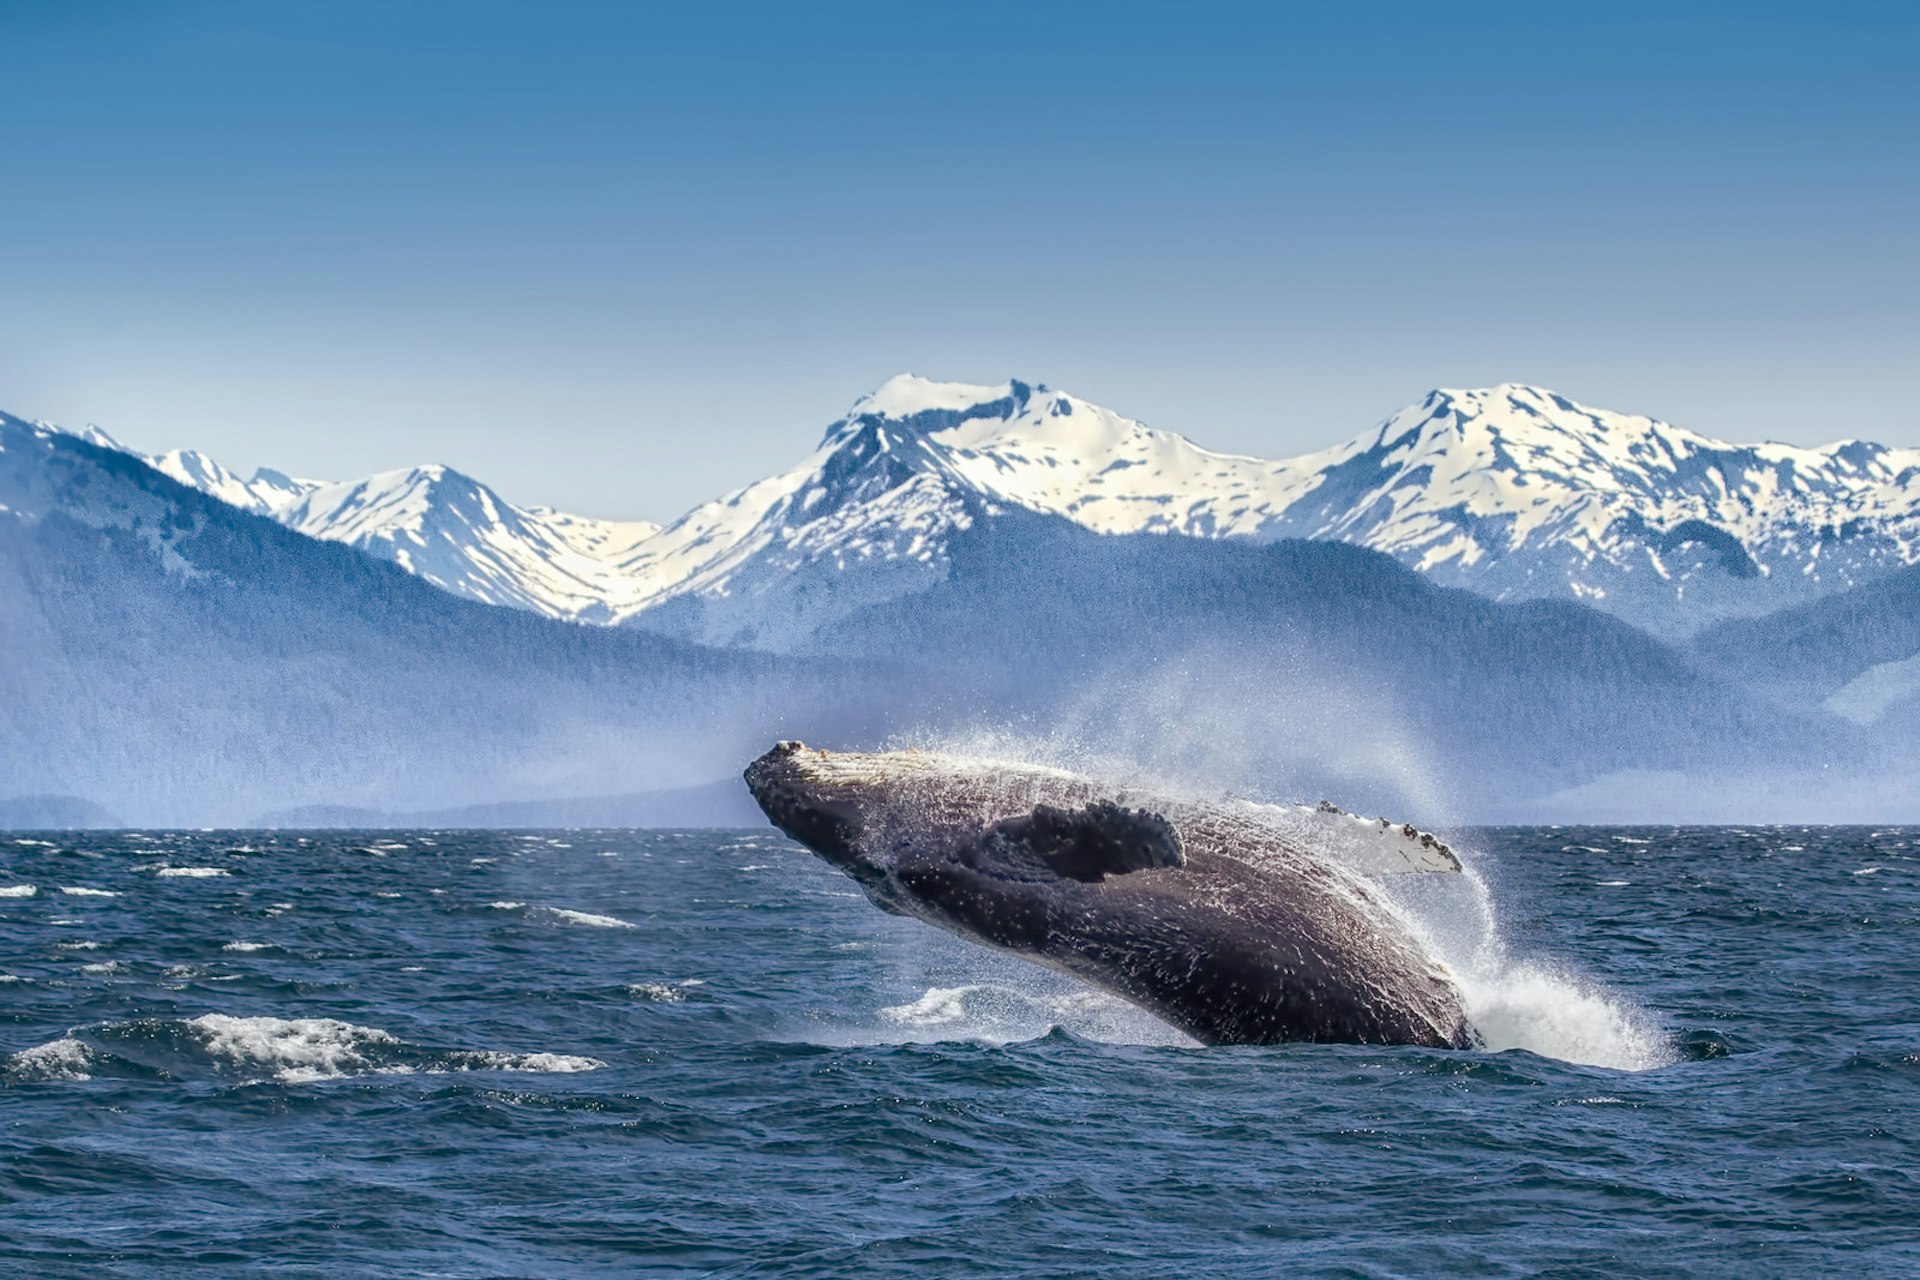 A large humpback whale breaches from the ocean. Snow-covered mountains can be seen in the background.